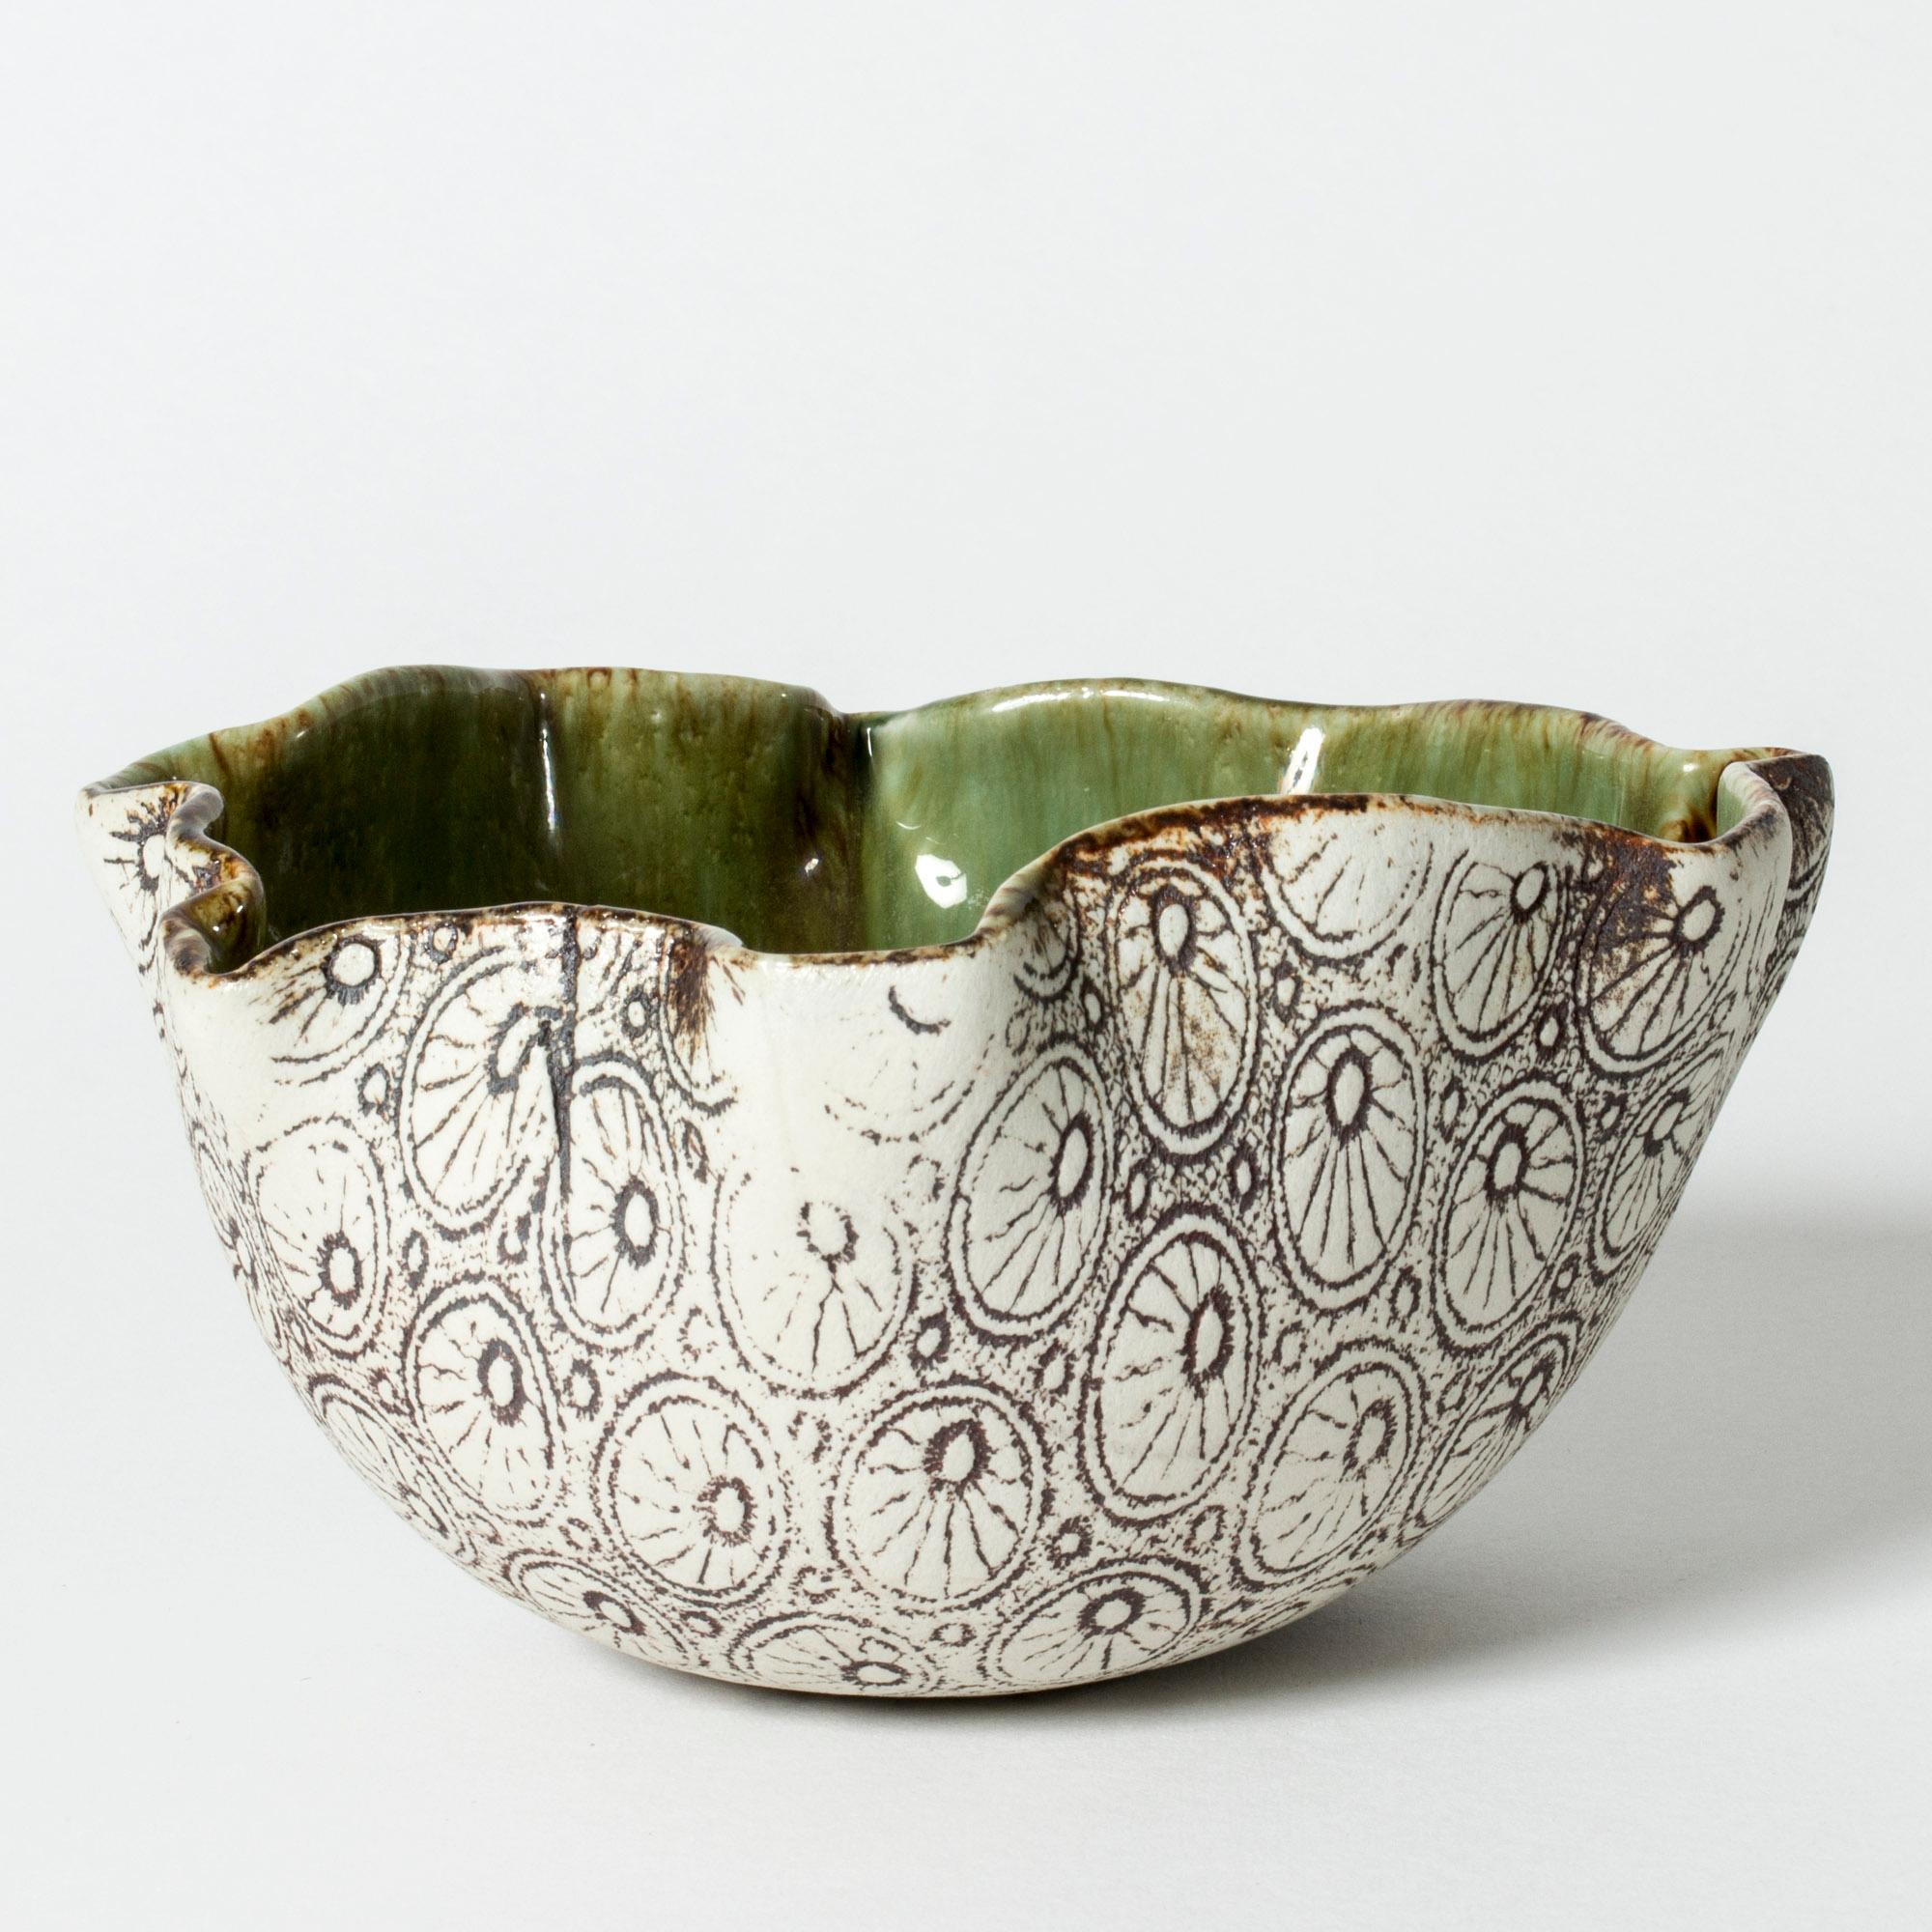 Unique stoneware bowl by Bengt Berglund, in an organic form with an undulating edge. Beautiful blue and green glazed inside, unglazed outside with an embossed graphic pattern.